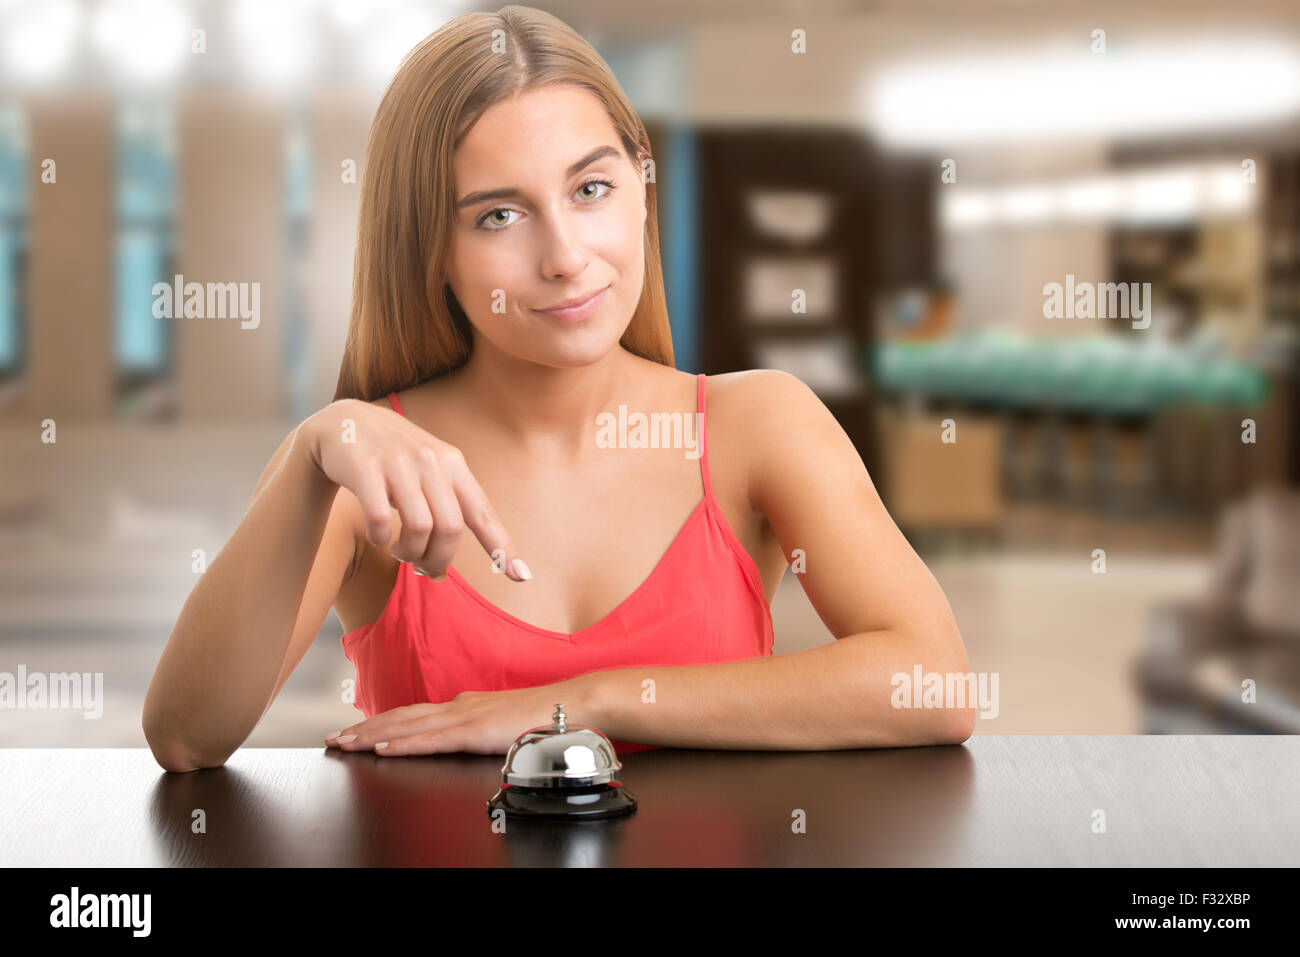 Woman about to ring a counter bell isolated in an hotel Stock Photo